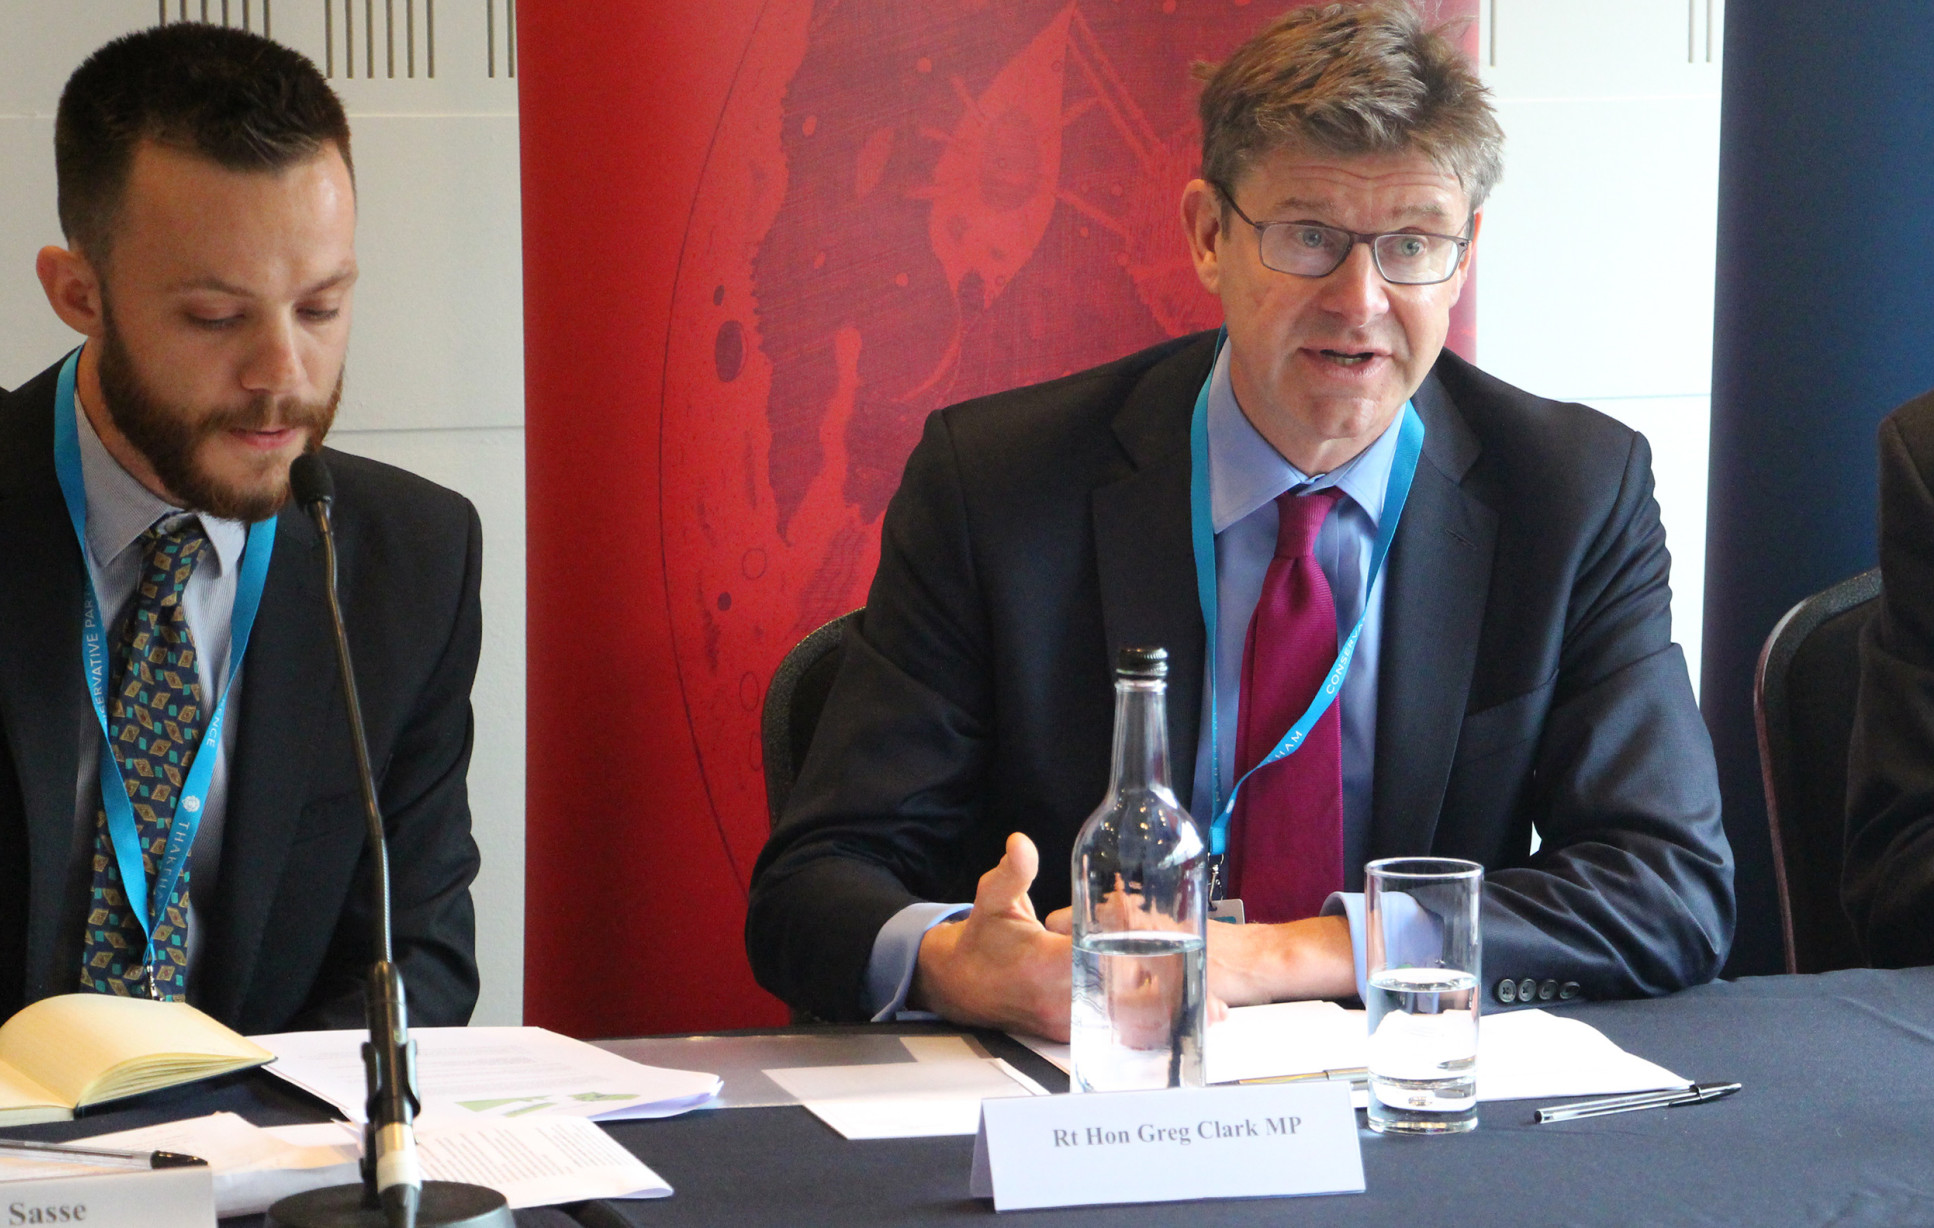 Greg Clark, Chair of the Commons Science and Technology Committee